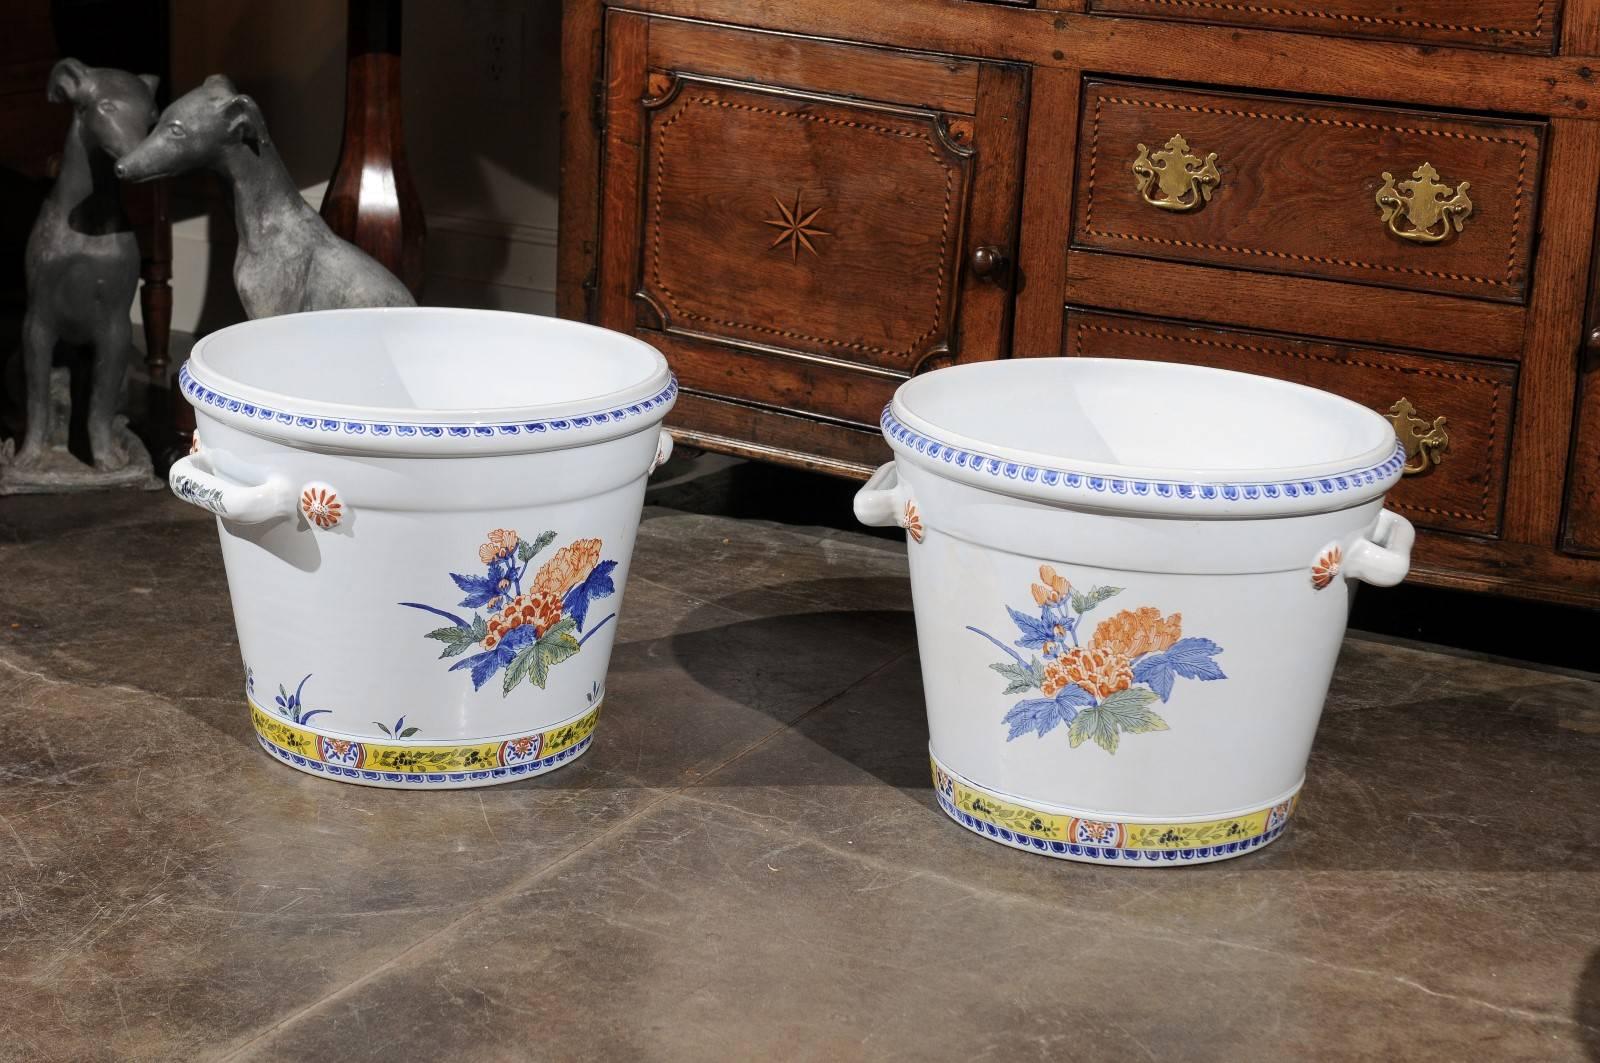 This pair of French faience cache pots or jardinières from the mid-20th century feature round and white bodies, adorned with blue lining decor on the lips as well as exquisite hand-painted bouquets of flowers in the center with blue, green and